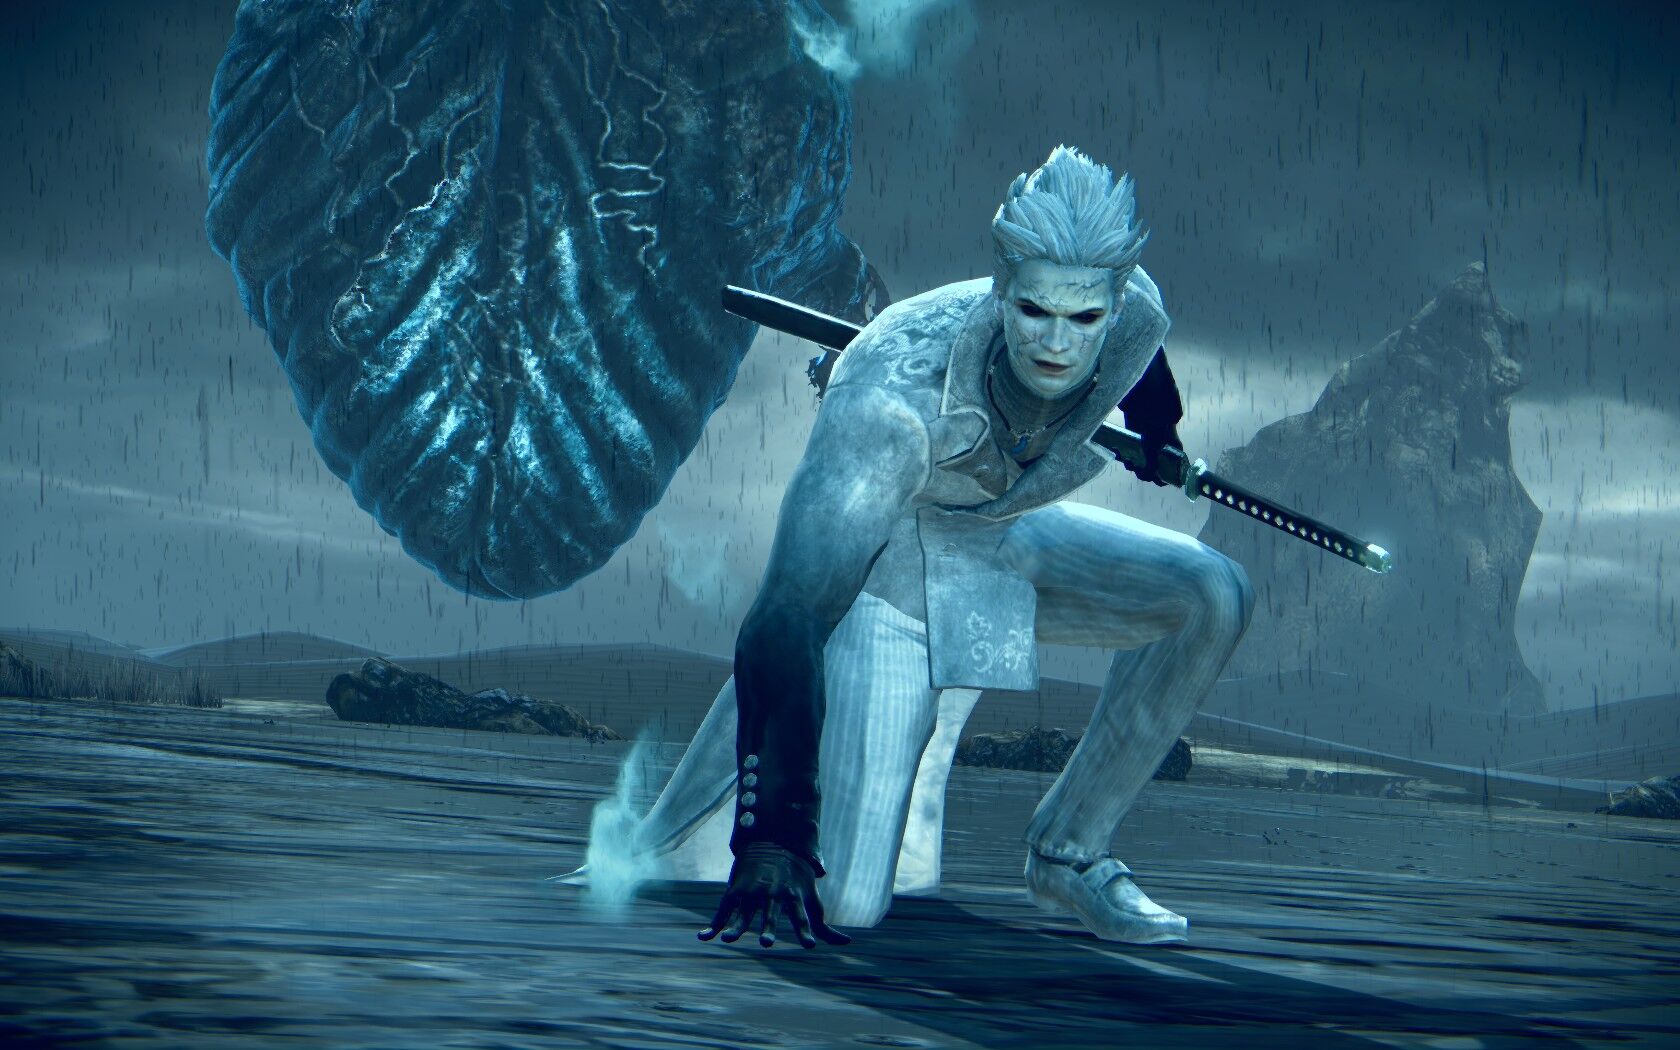 If the reboot series hadn't ended due to the hate would u want to see the  new demon king Vergil taking on Dante in dmc2 : r/DevilMayCry